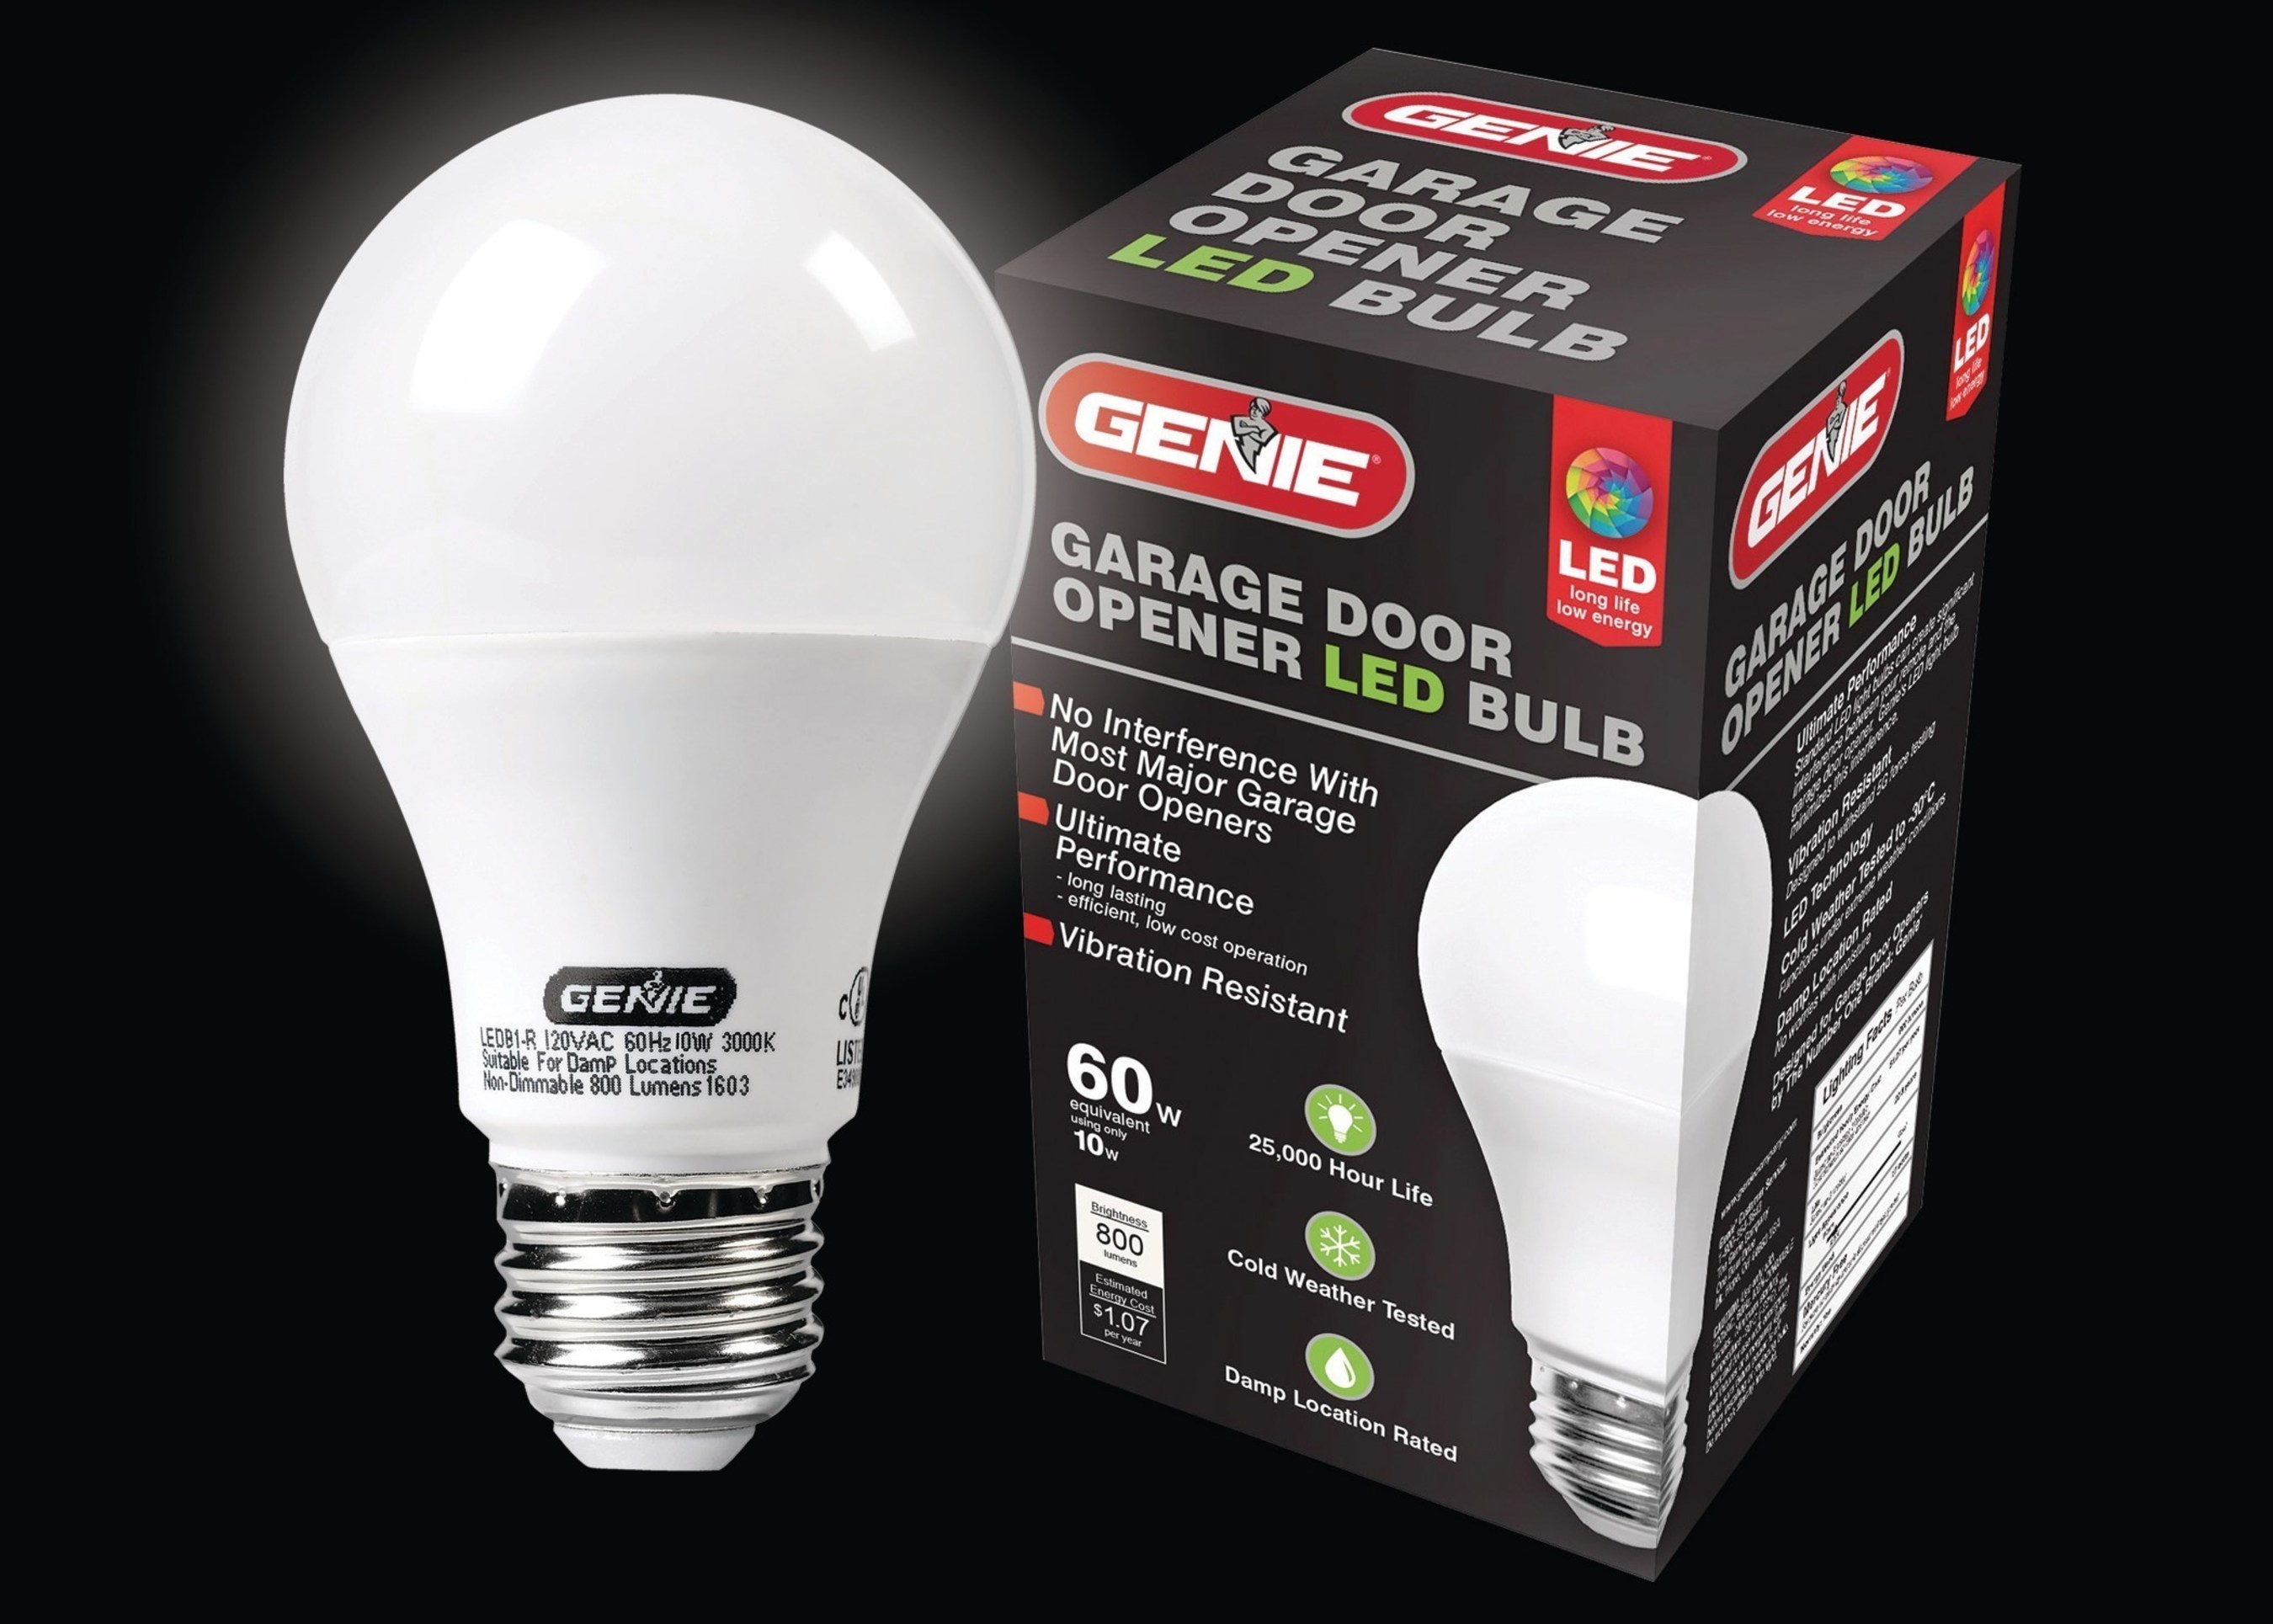 The Genie Company Reinvents The Light Bulb With New Led Bulb For Garage Door Openers